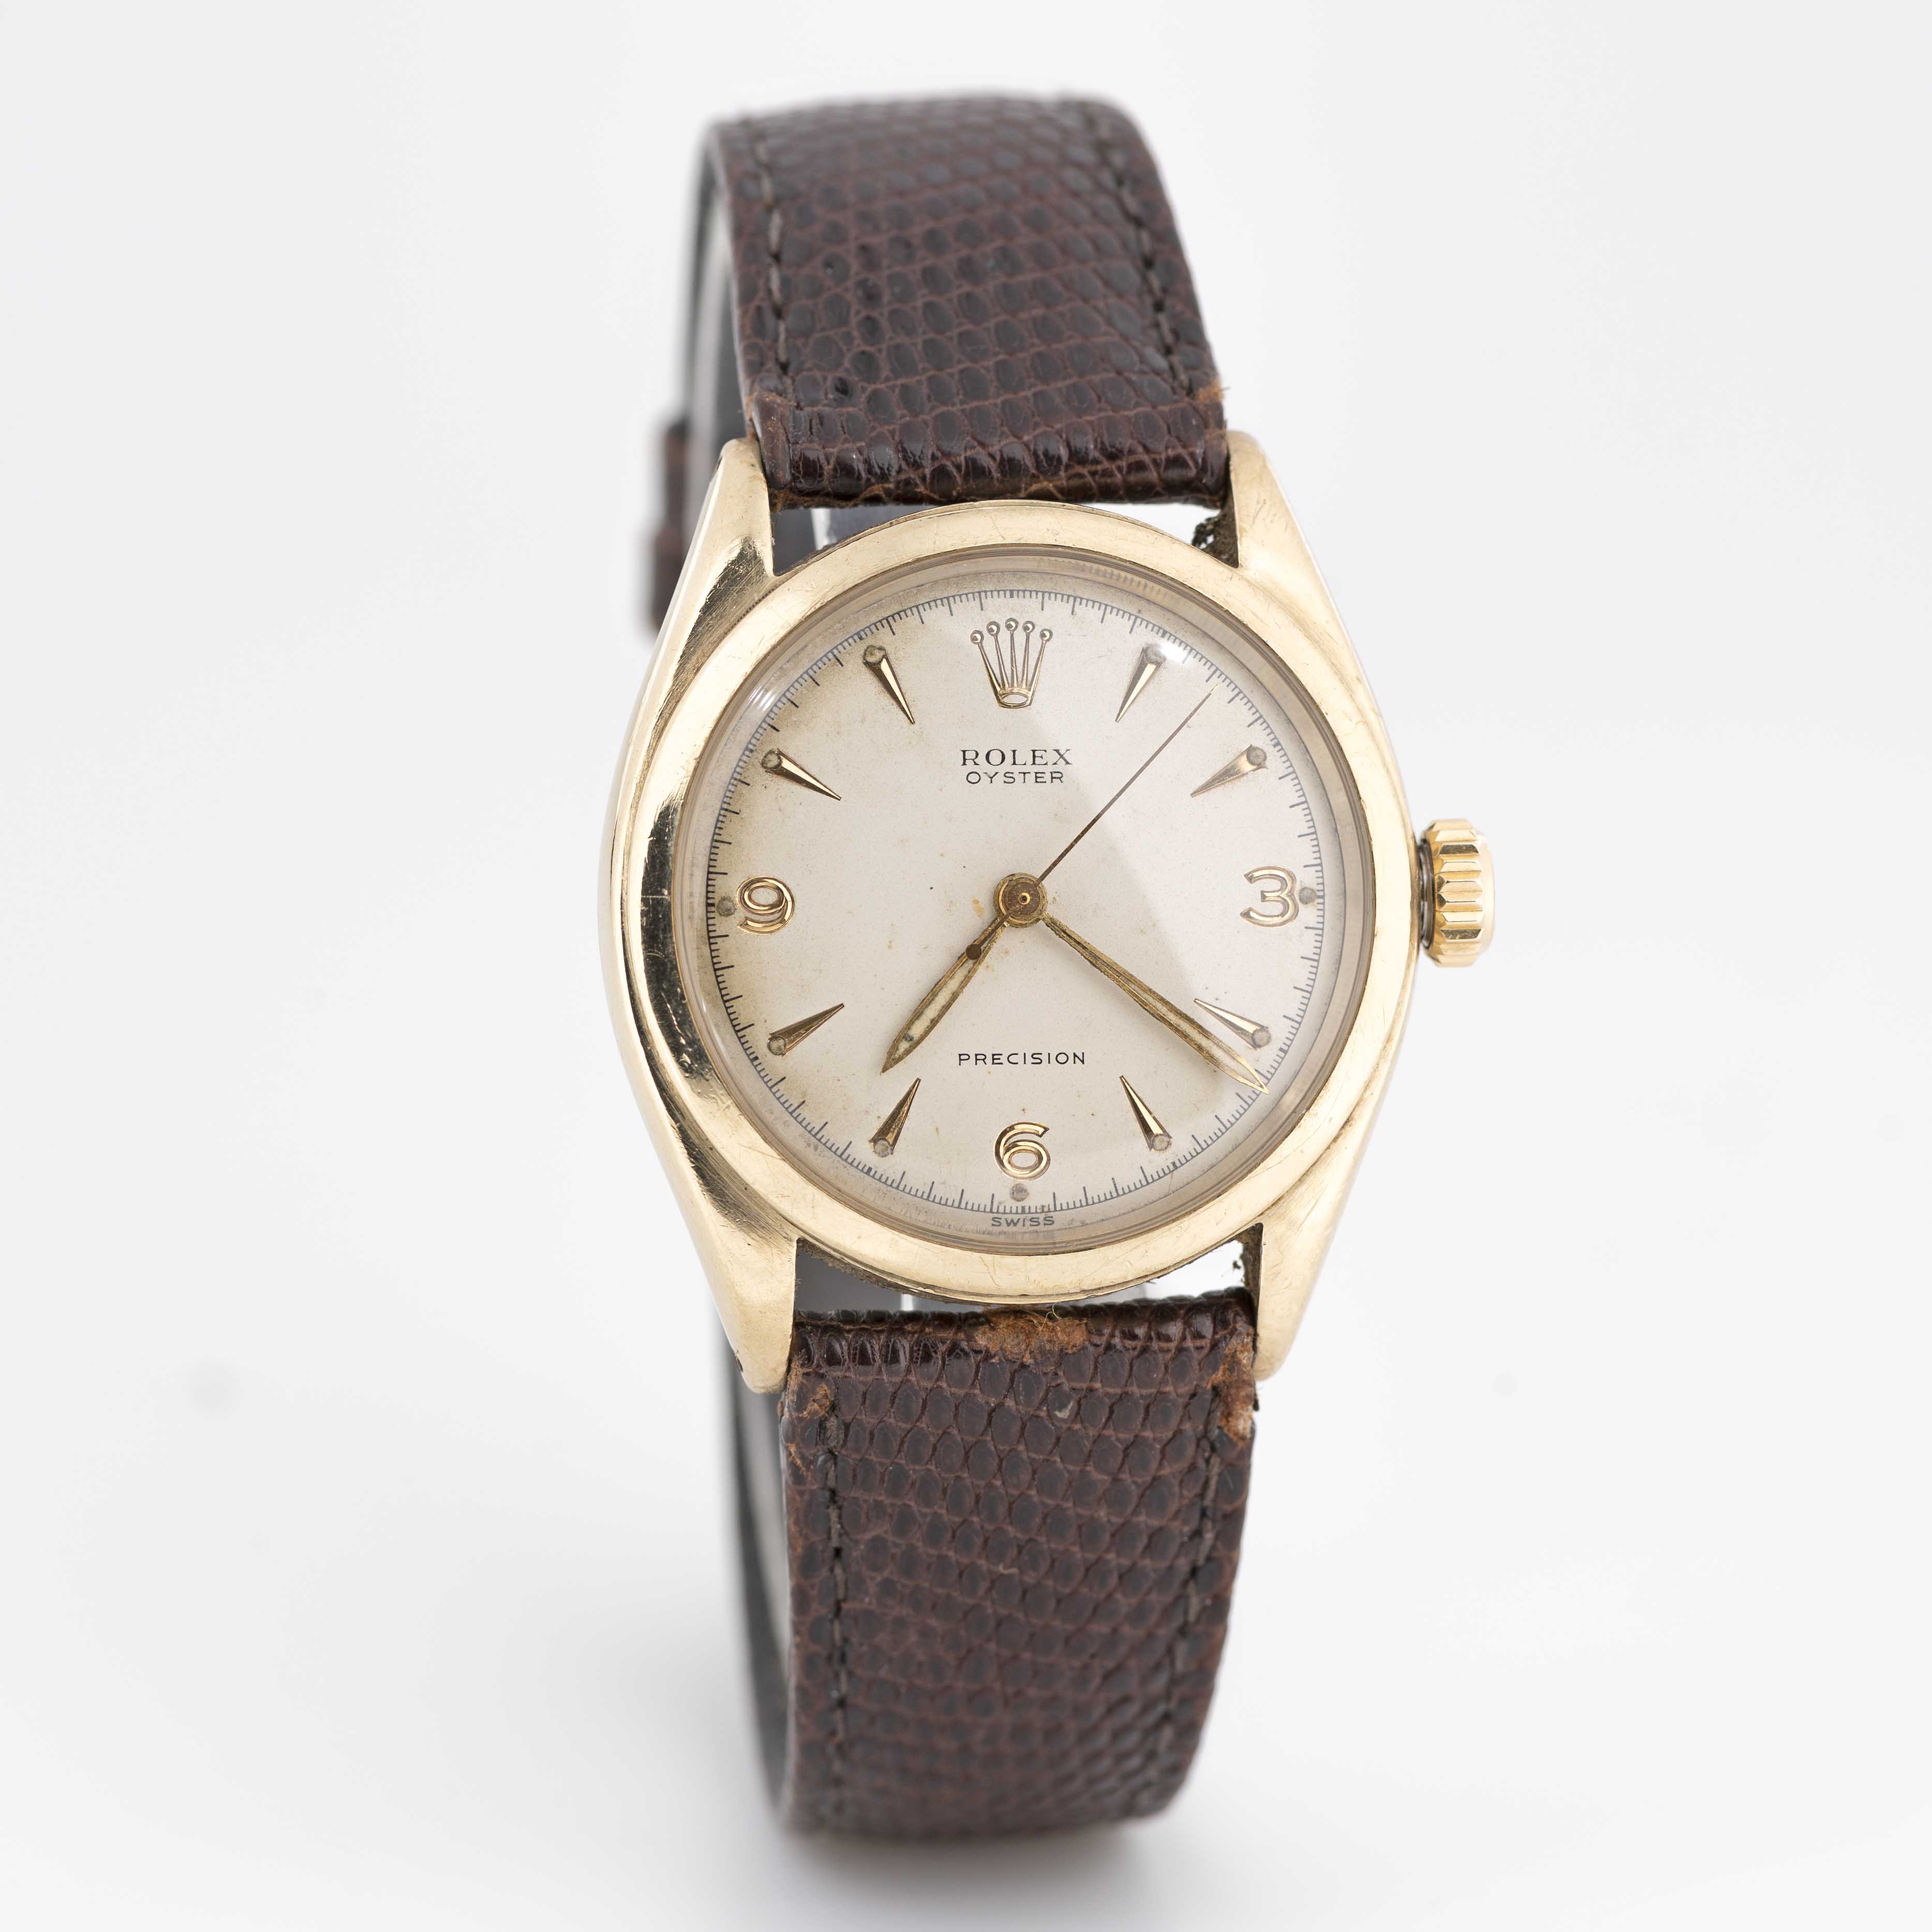 A RARE GENTLEMAN'S 10K SOLID GOLD ROLEX OYSTER PRECISION WRIST WATCH CIRCA 1952, REF. 6022 WITH 3- - Image 5 of 9